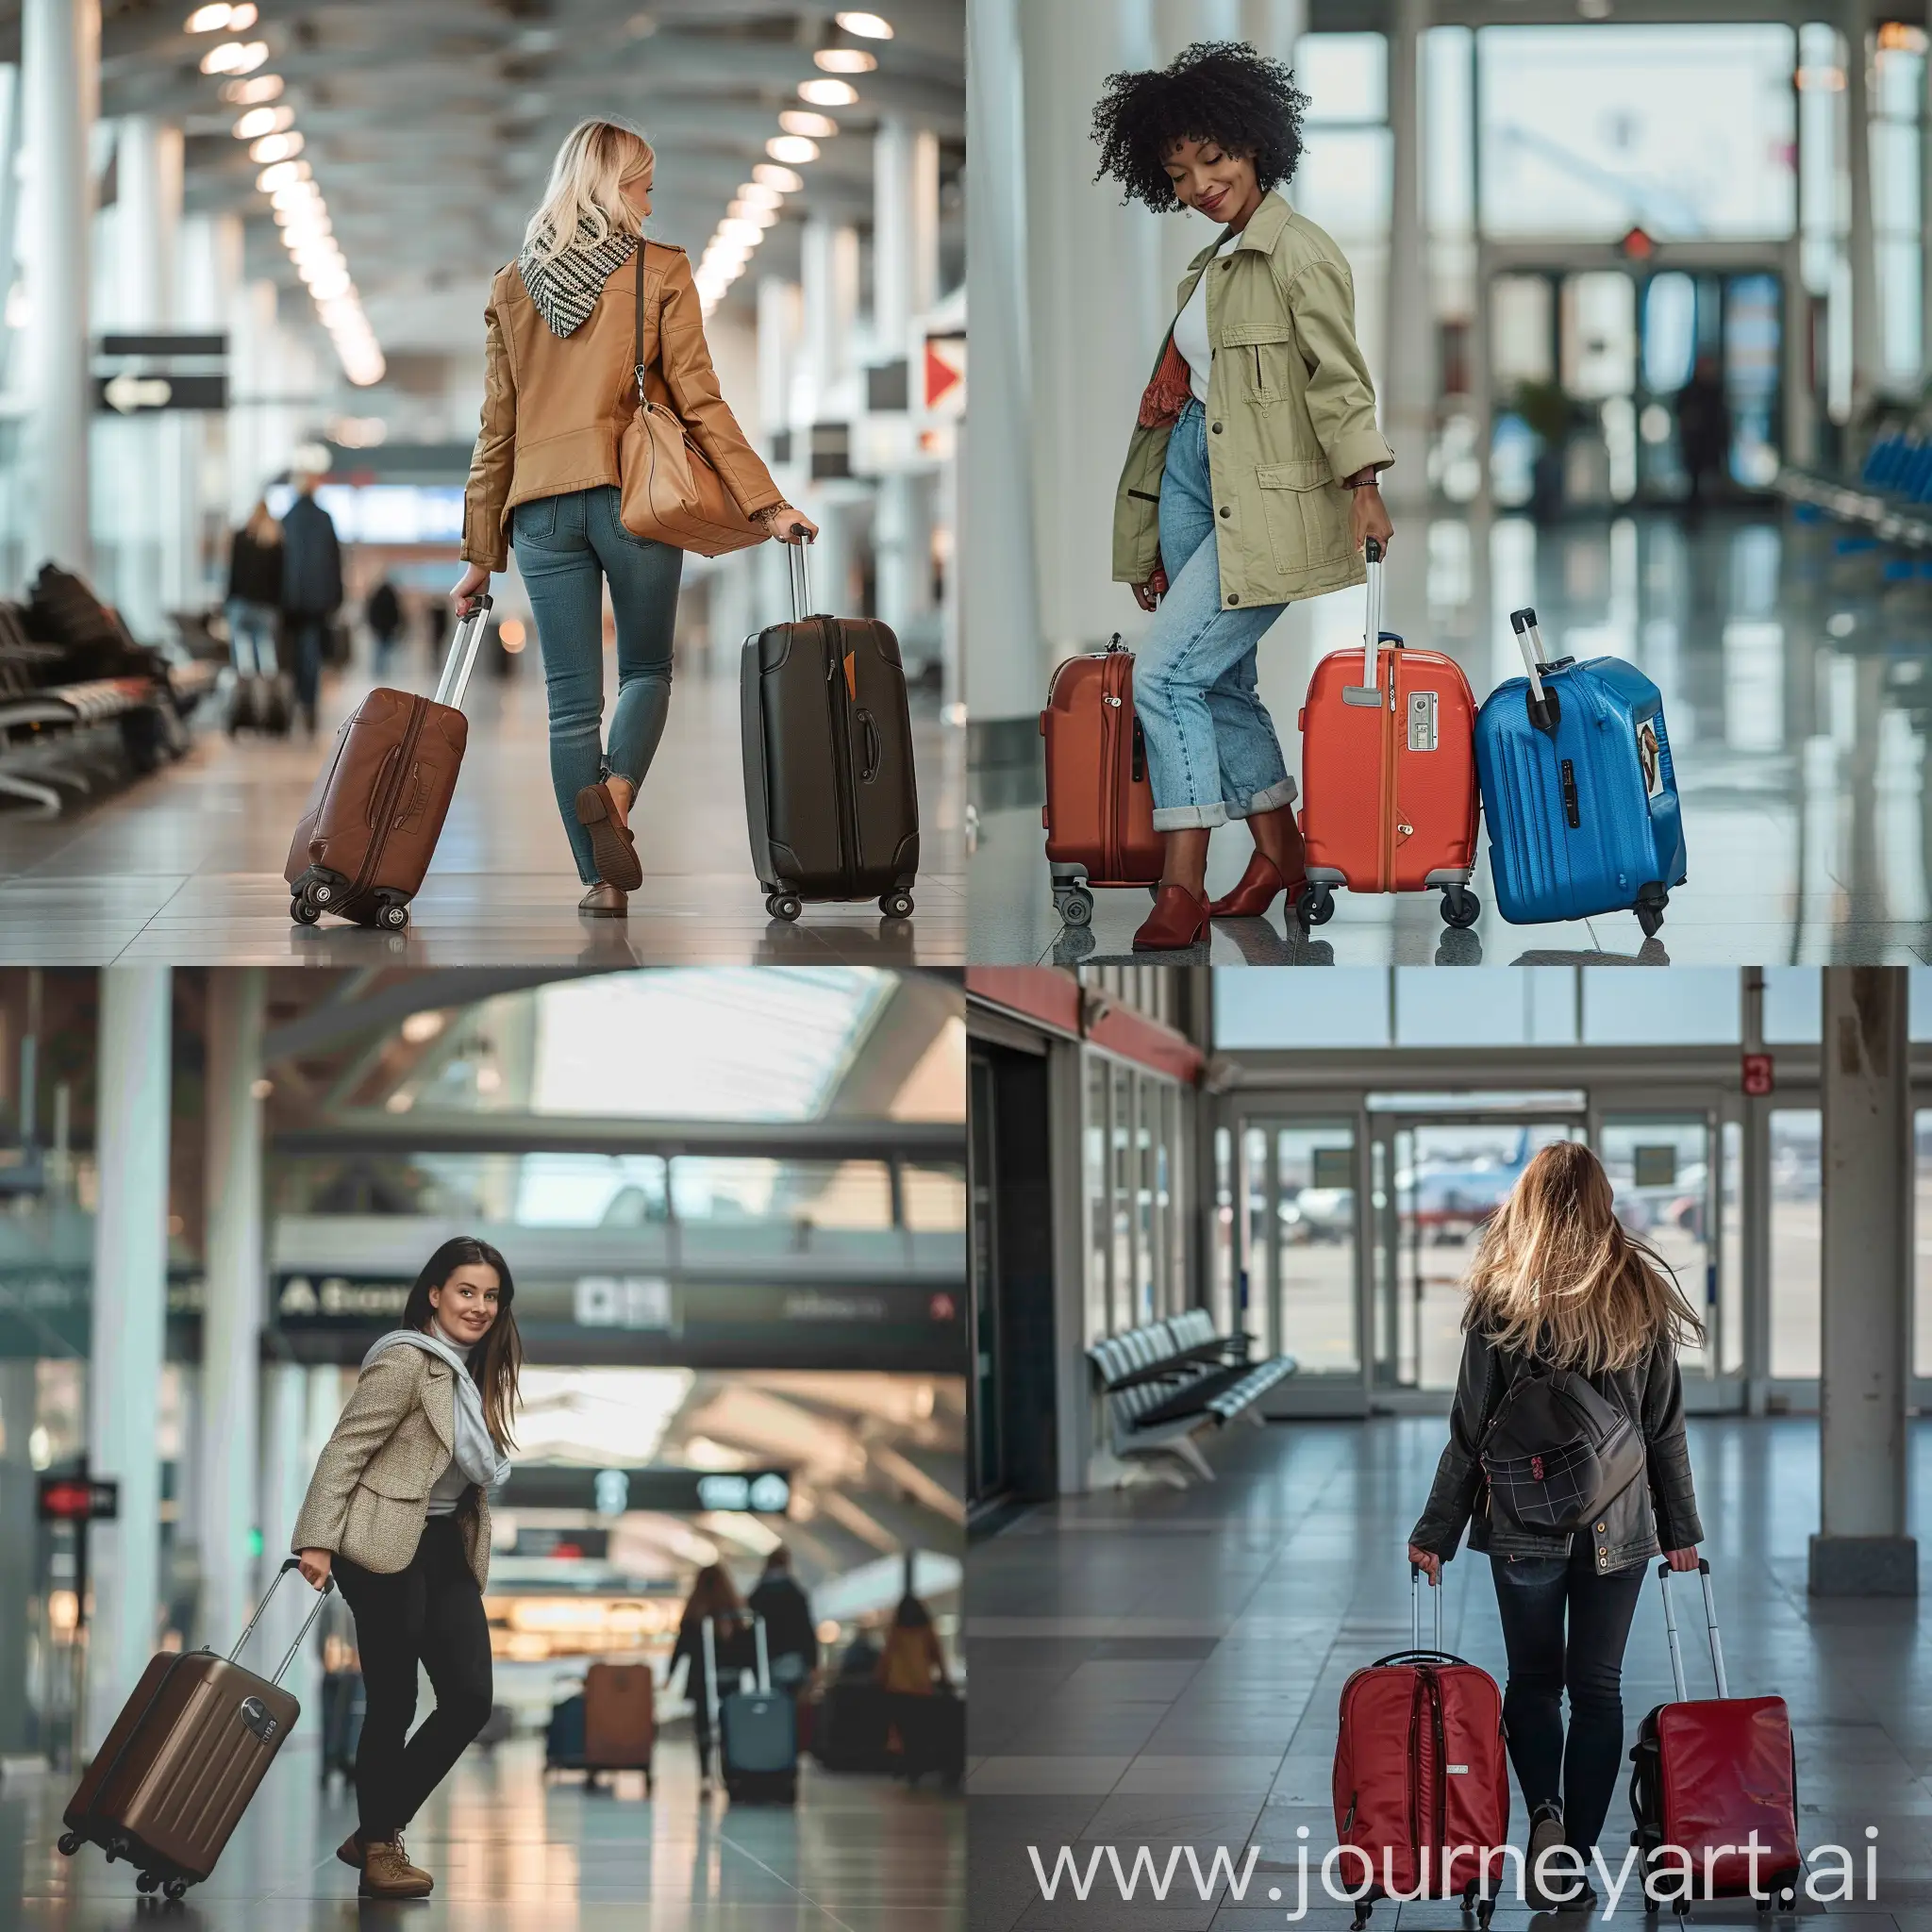 Woman-Pulling-Luggage-at-Airport-Terminal